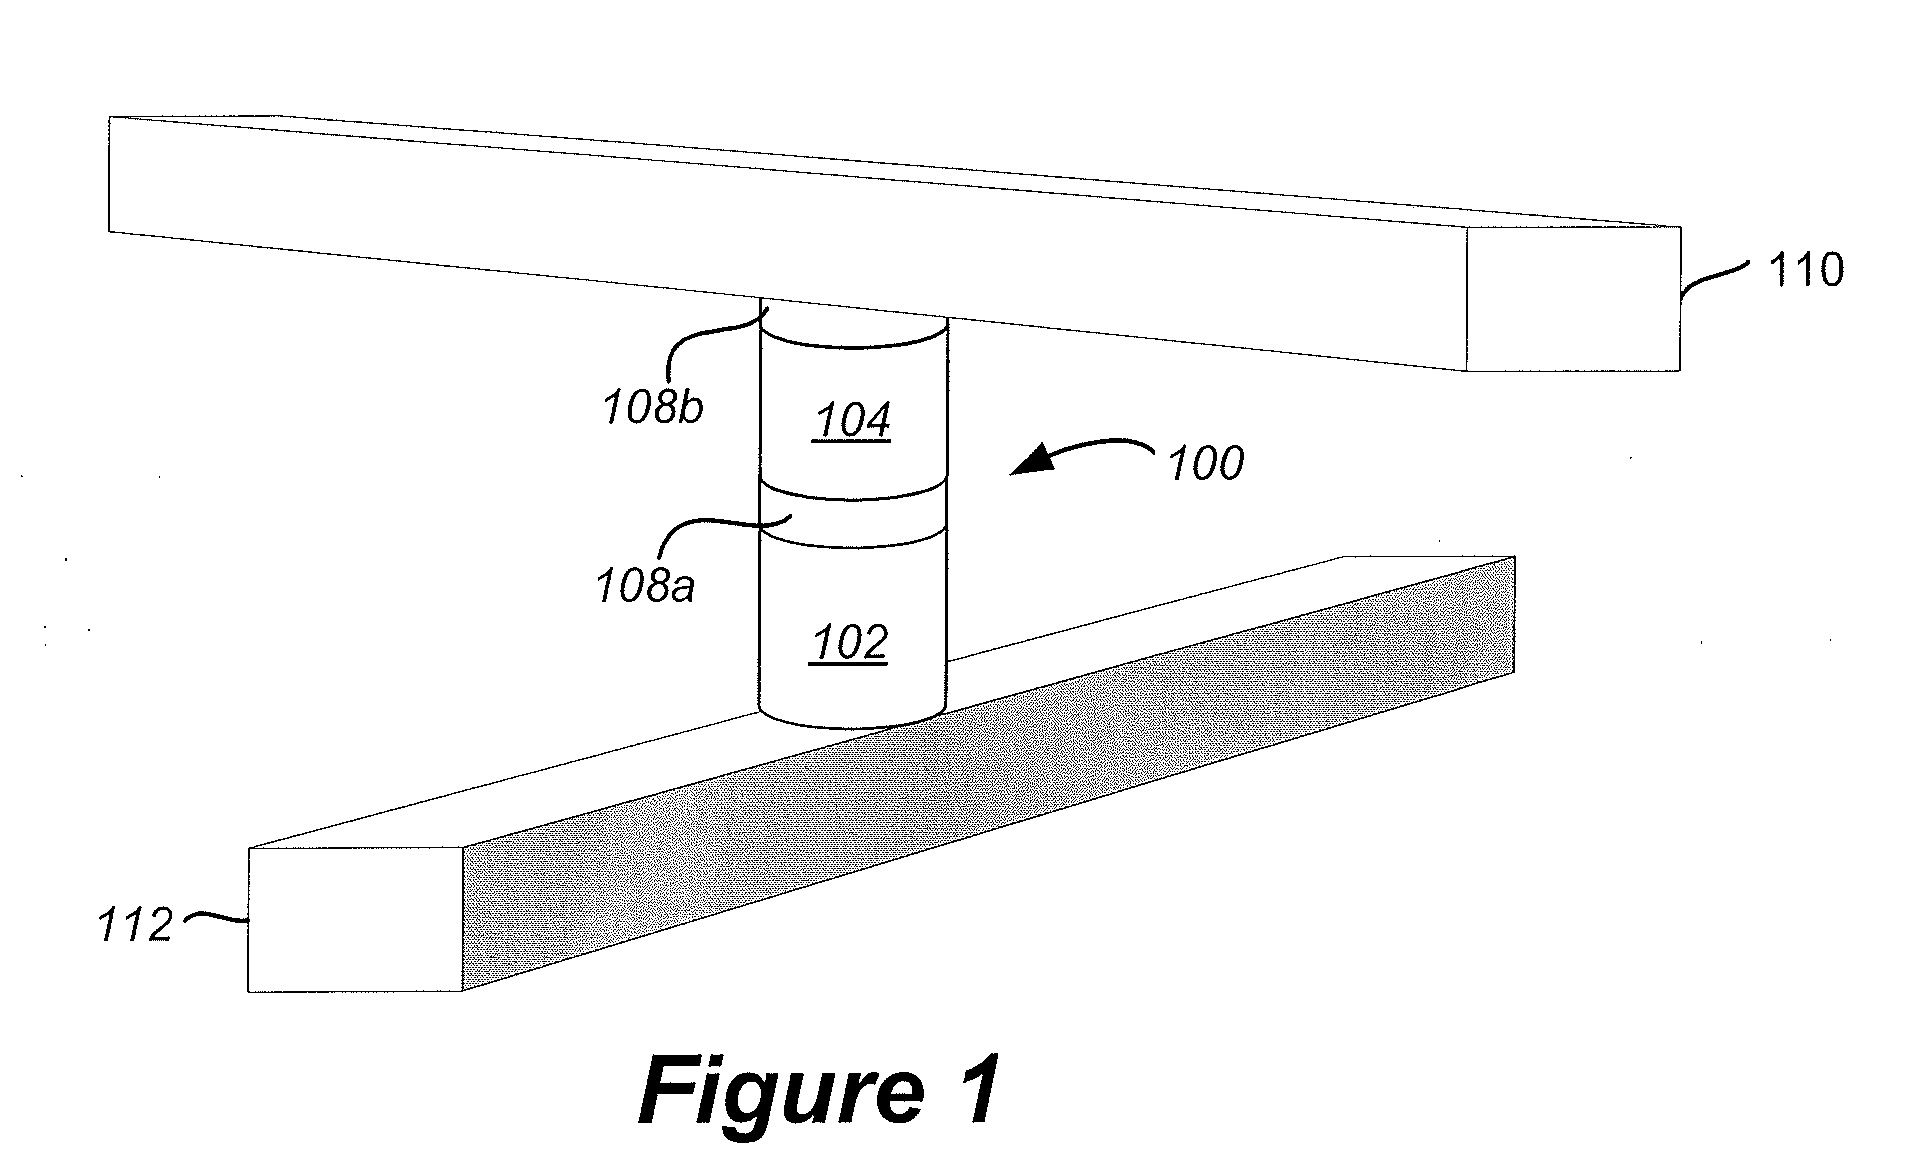 Optimized electrodes for re-ram